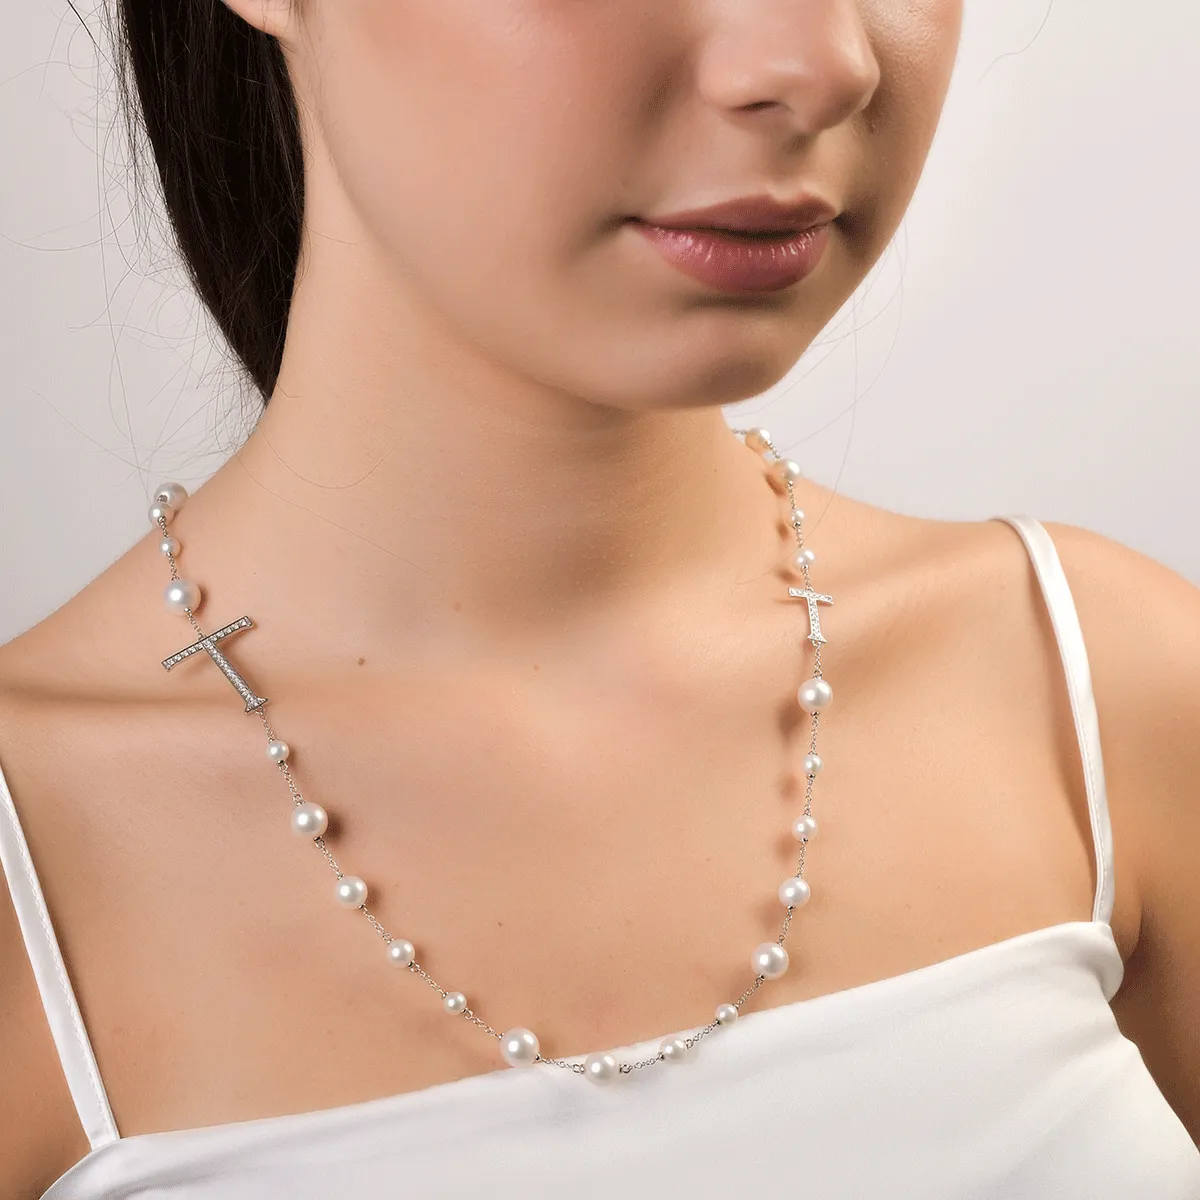 18K white gold necklace with 107.05ct fresh water pearls and 0.5ct diamonds